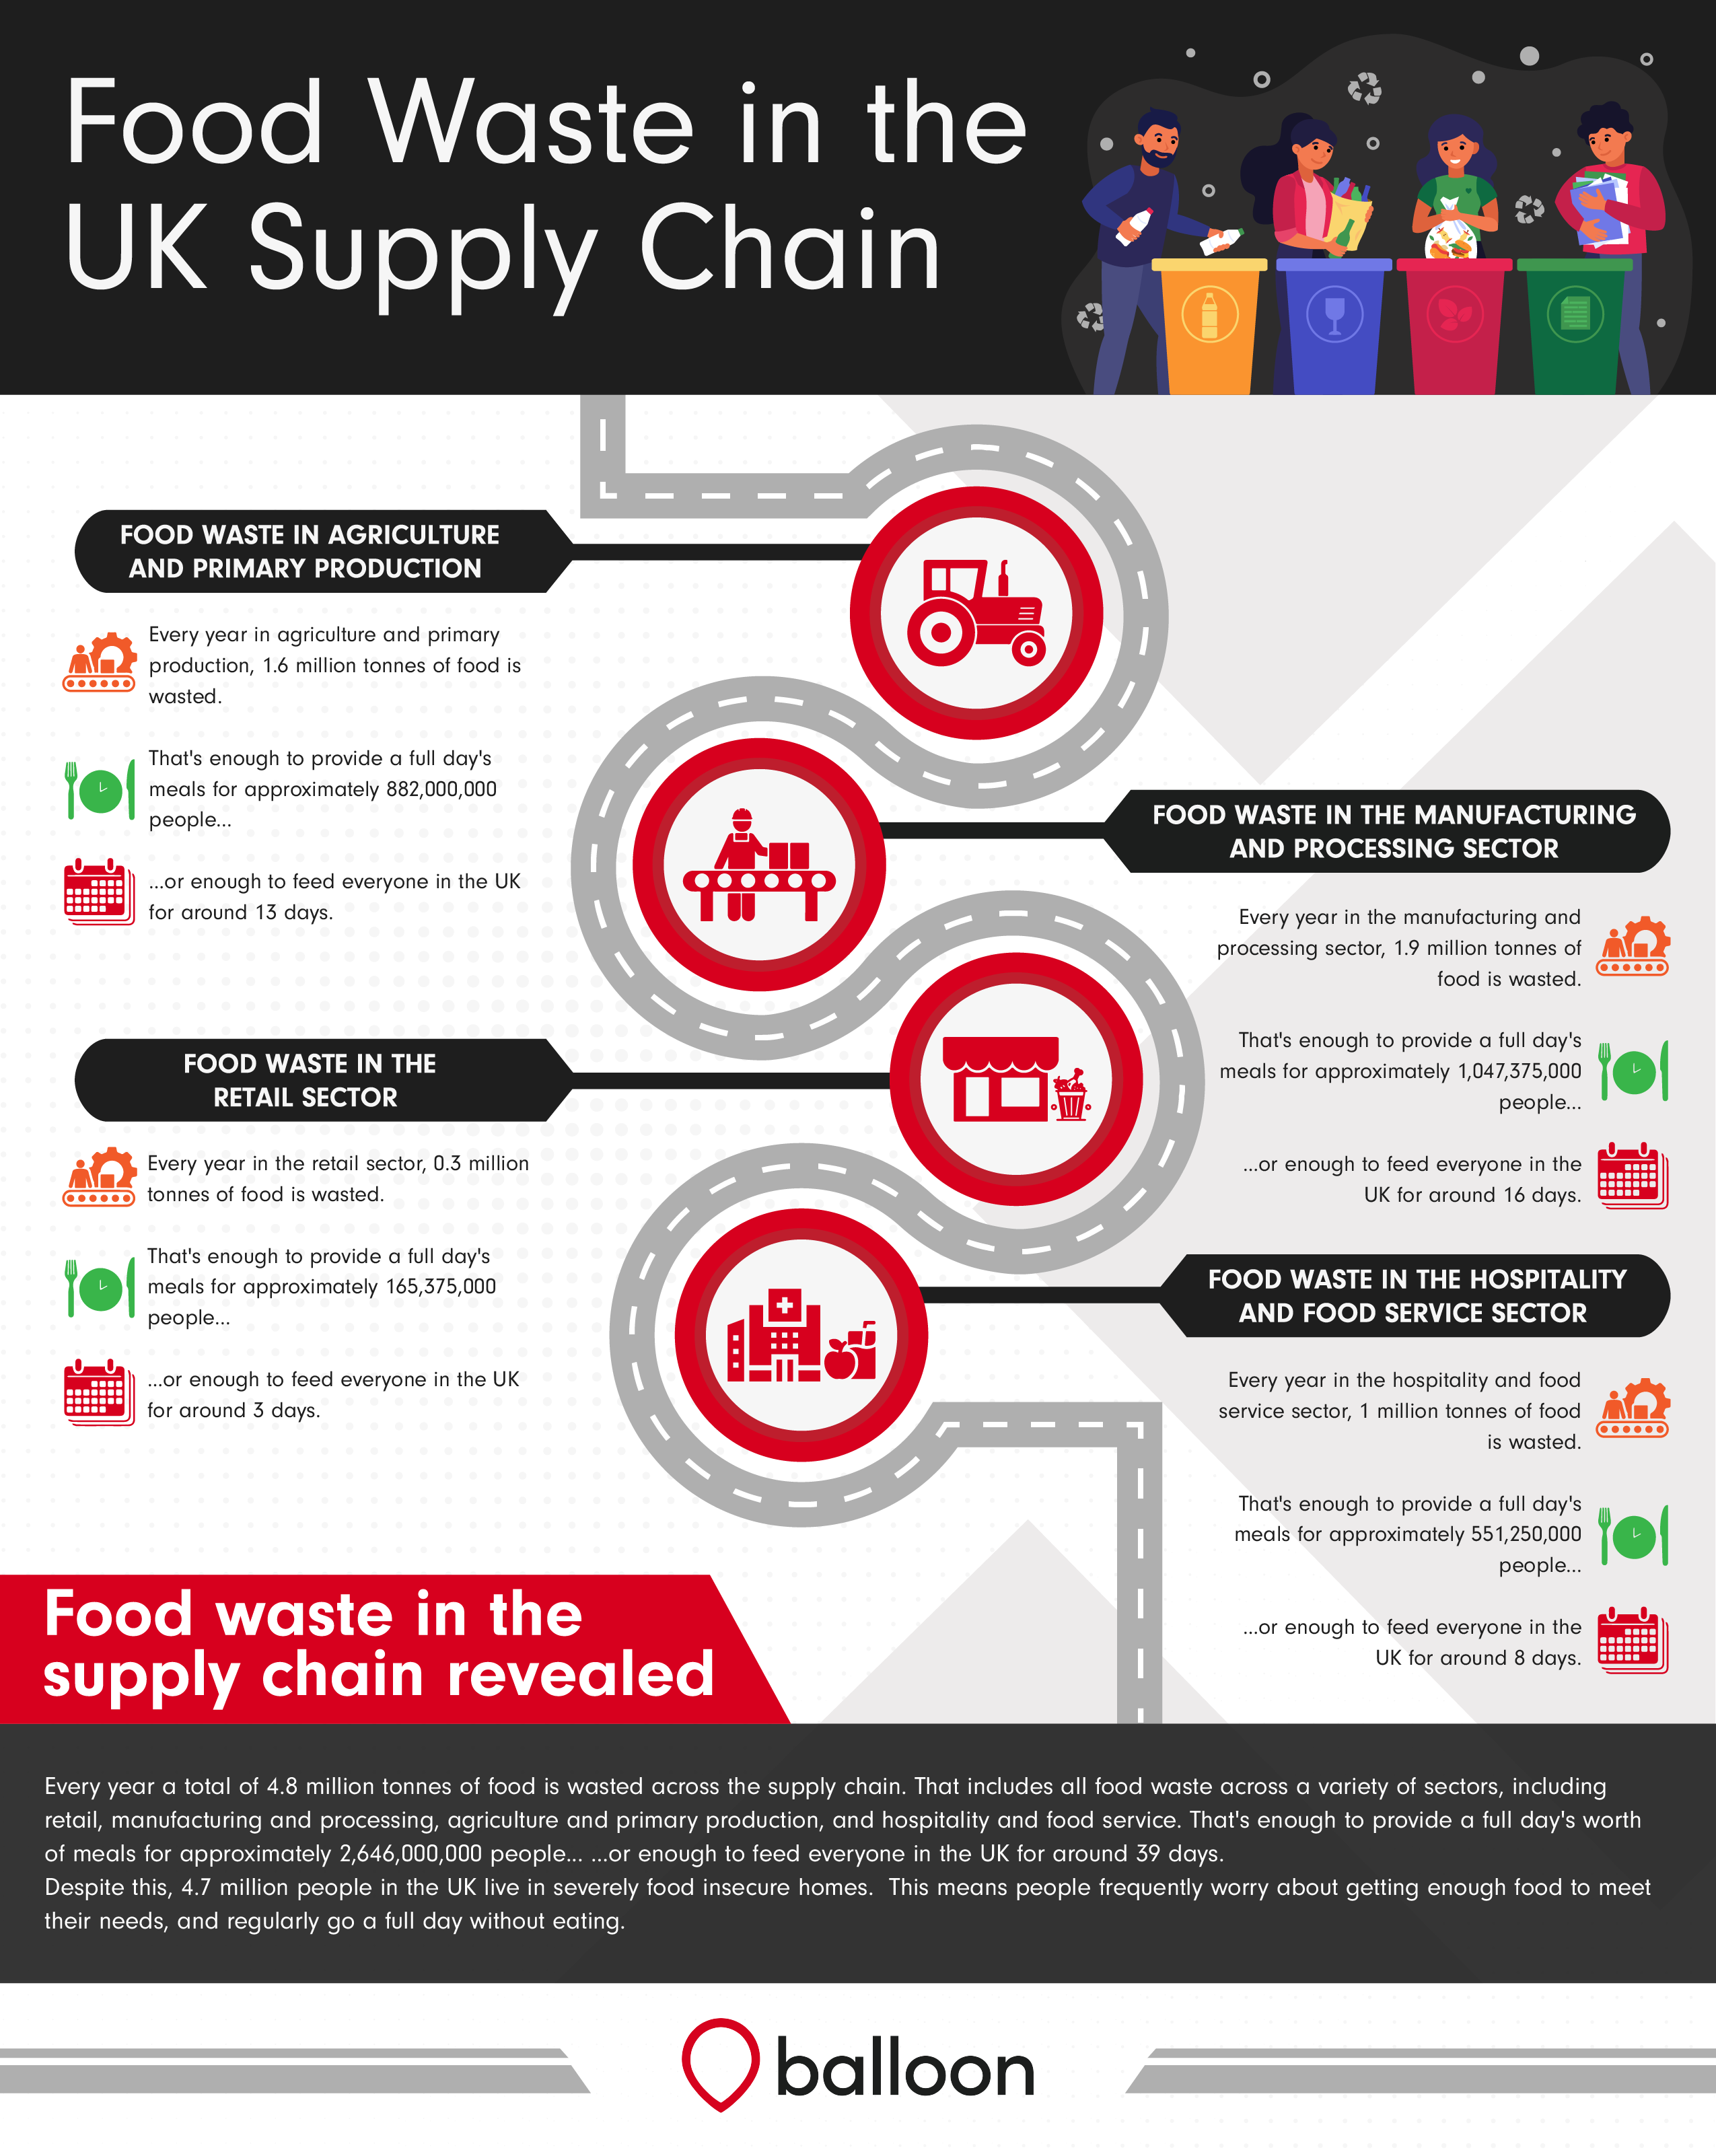 Balloon One studies the true cost of food waste in UK supply chain